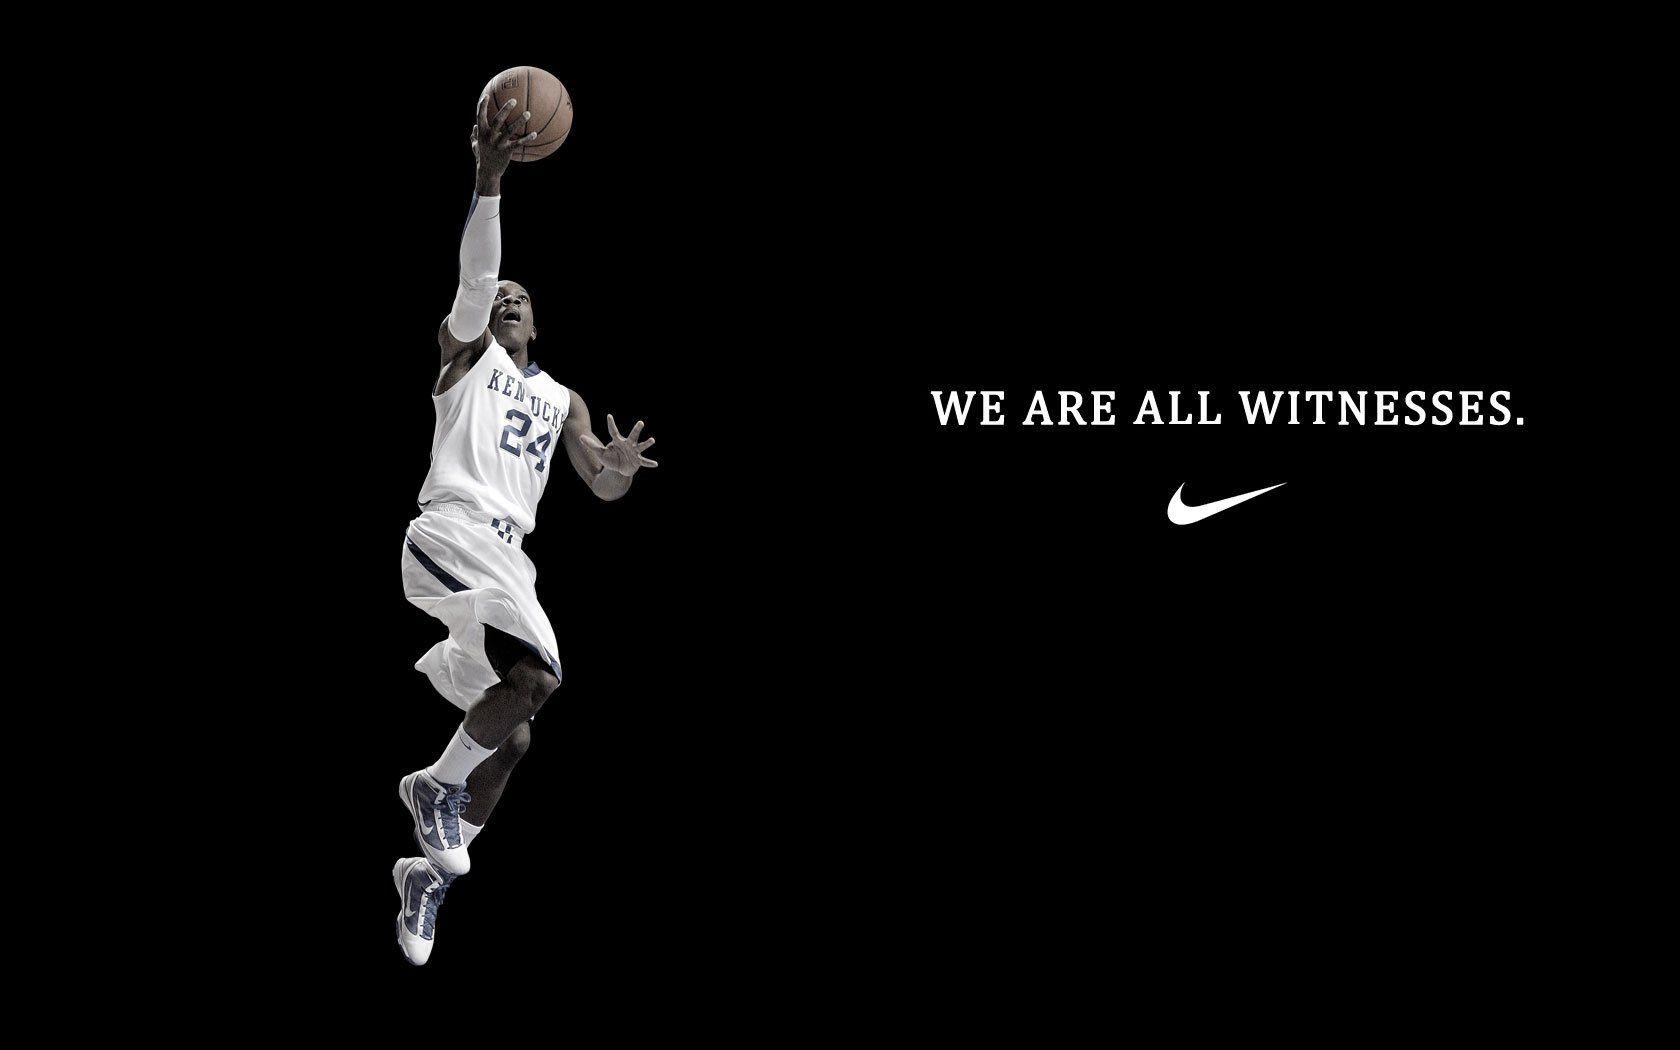 Nike Basketball Quotes Wallpaper iPhone